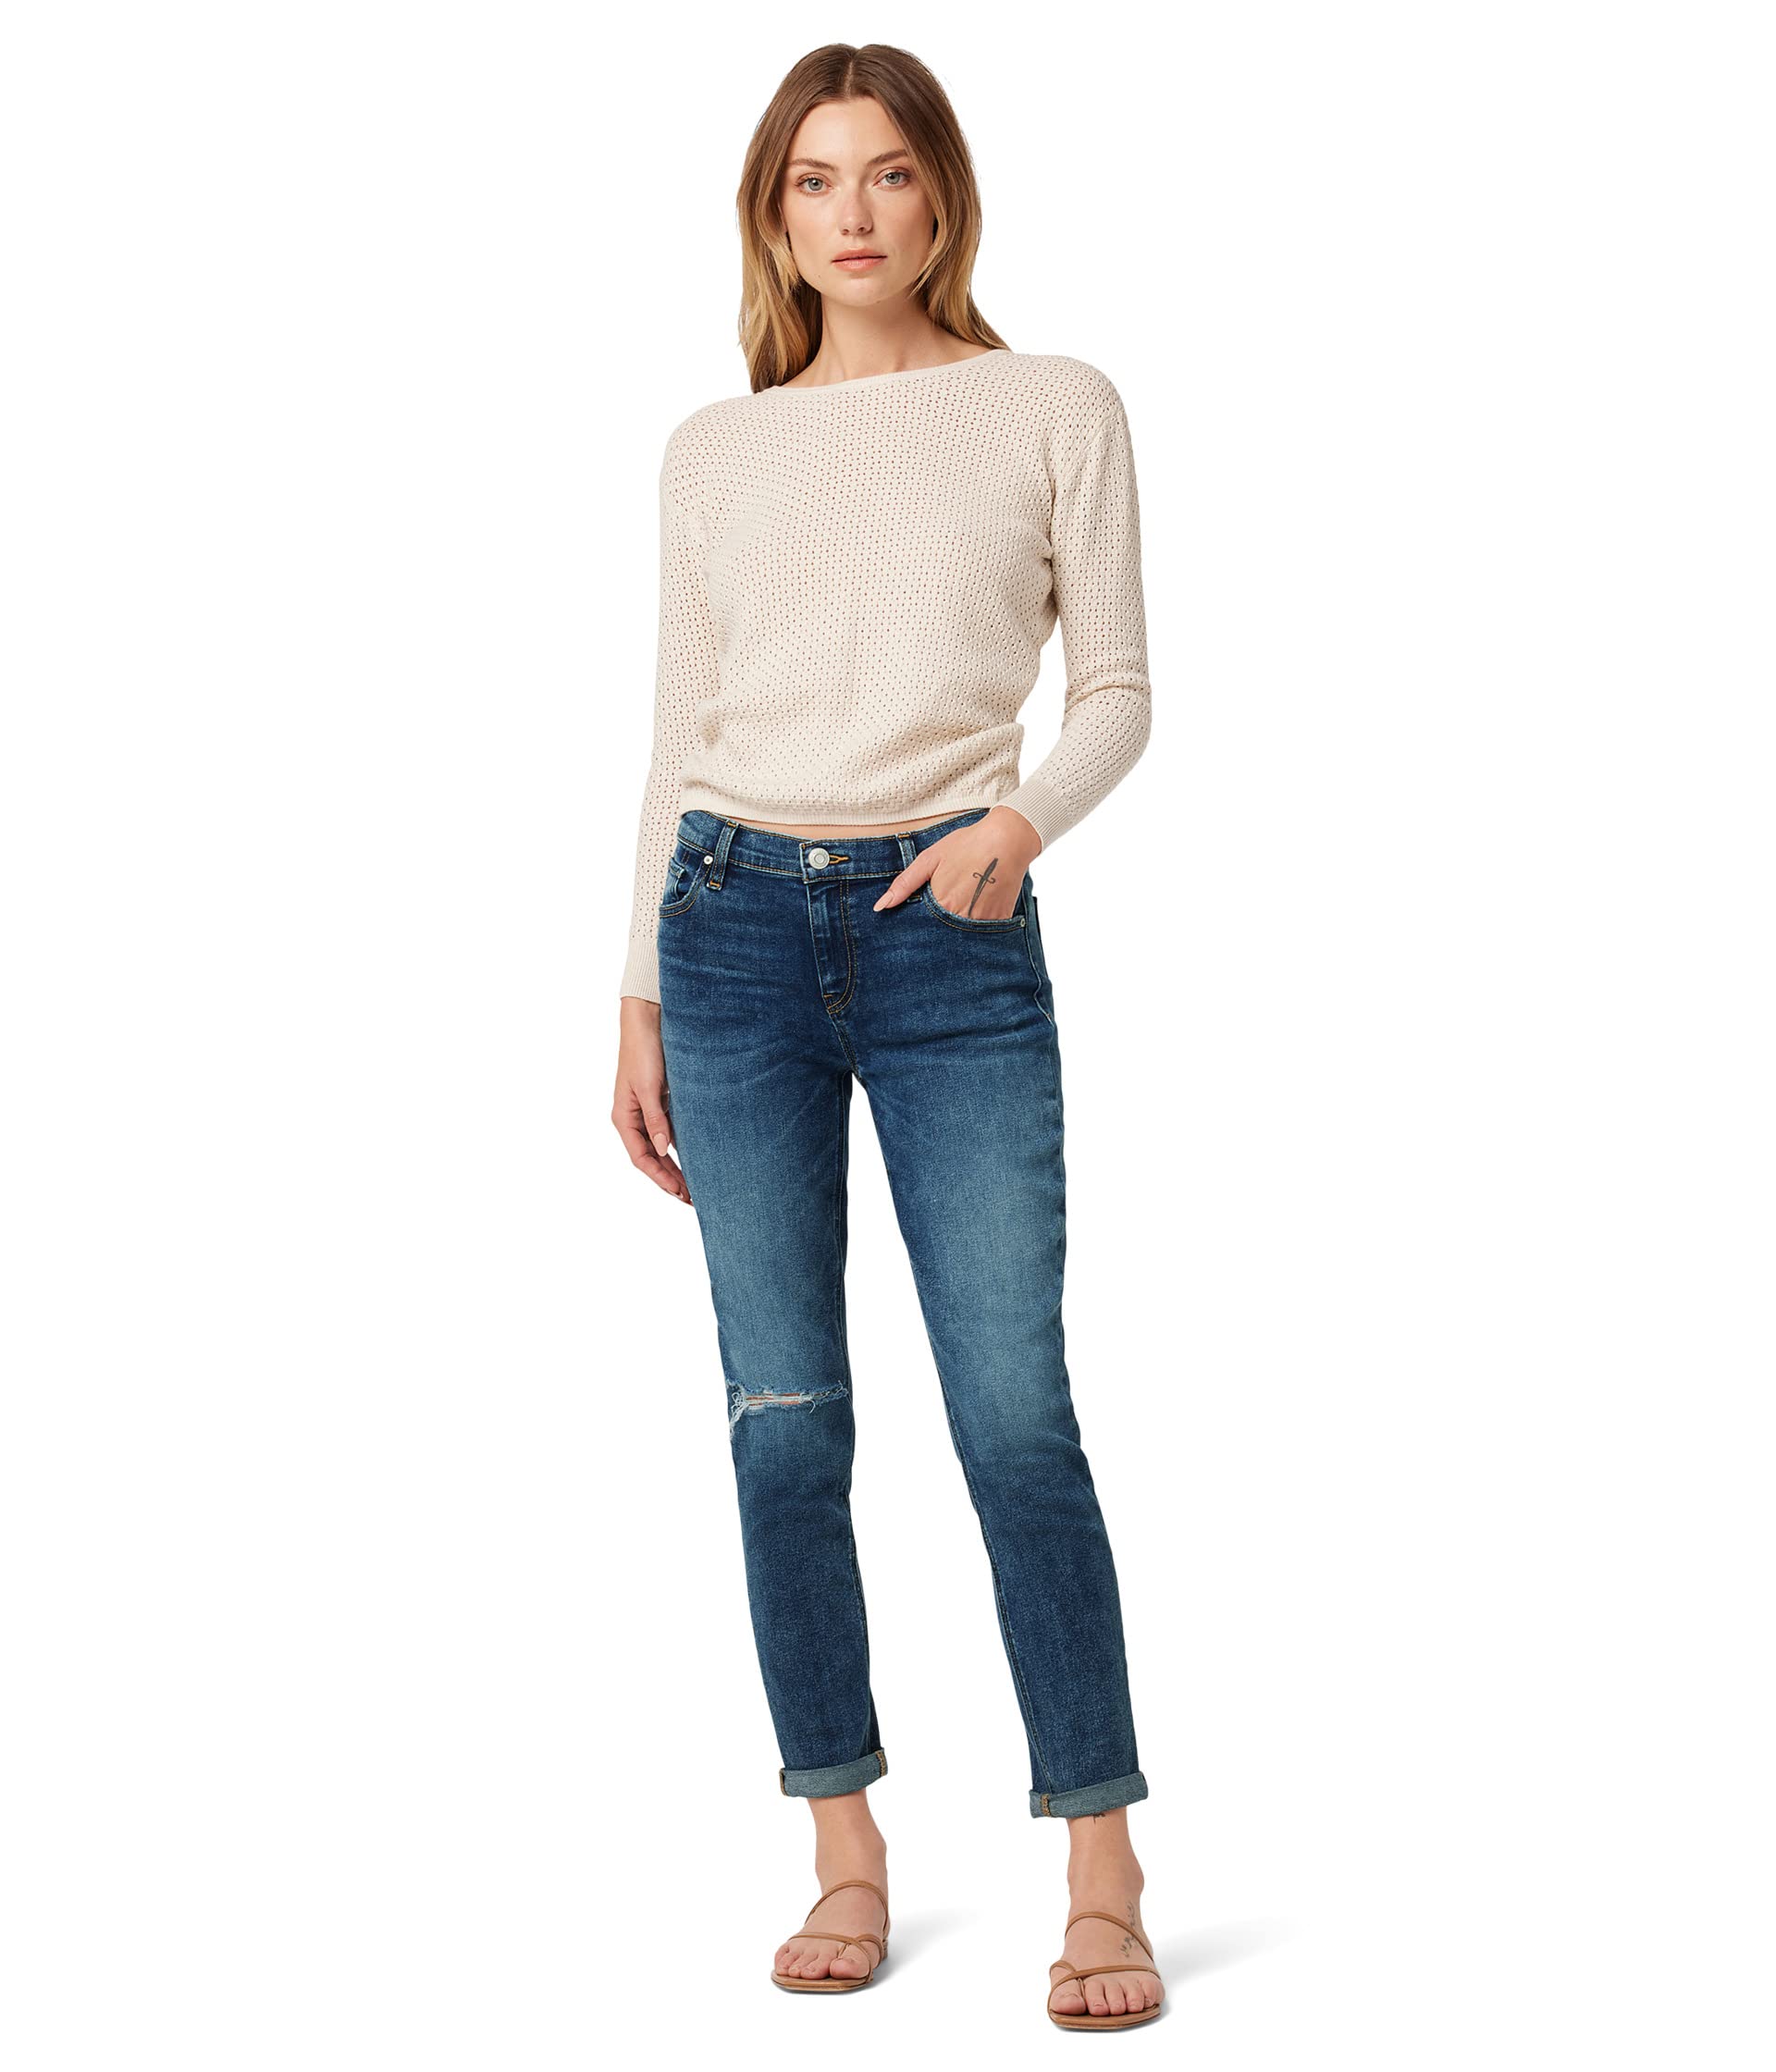 джинсы nico straight ankle maternity in journey home hudson jeans цвет journey home Джинсы Hudson Jeans, Lana Slim Boyfriend Crop in Journey Home Destructed